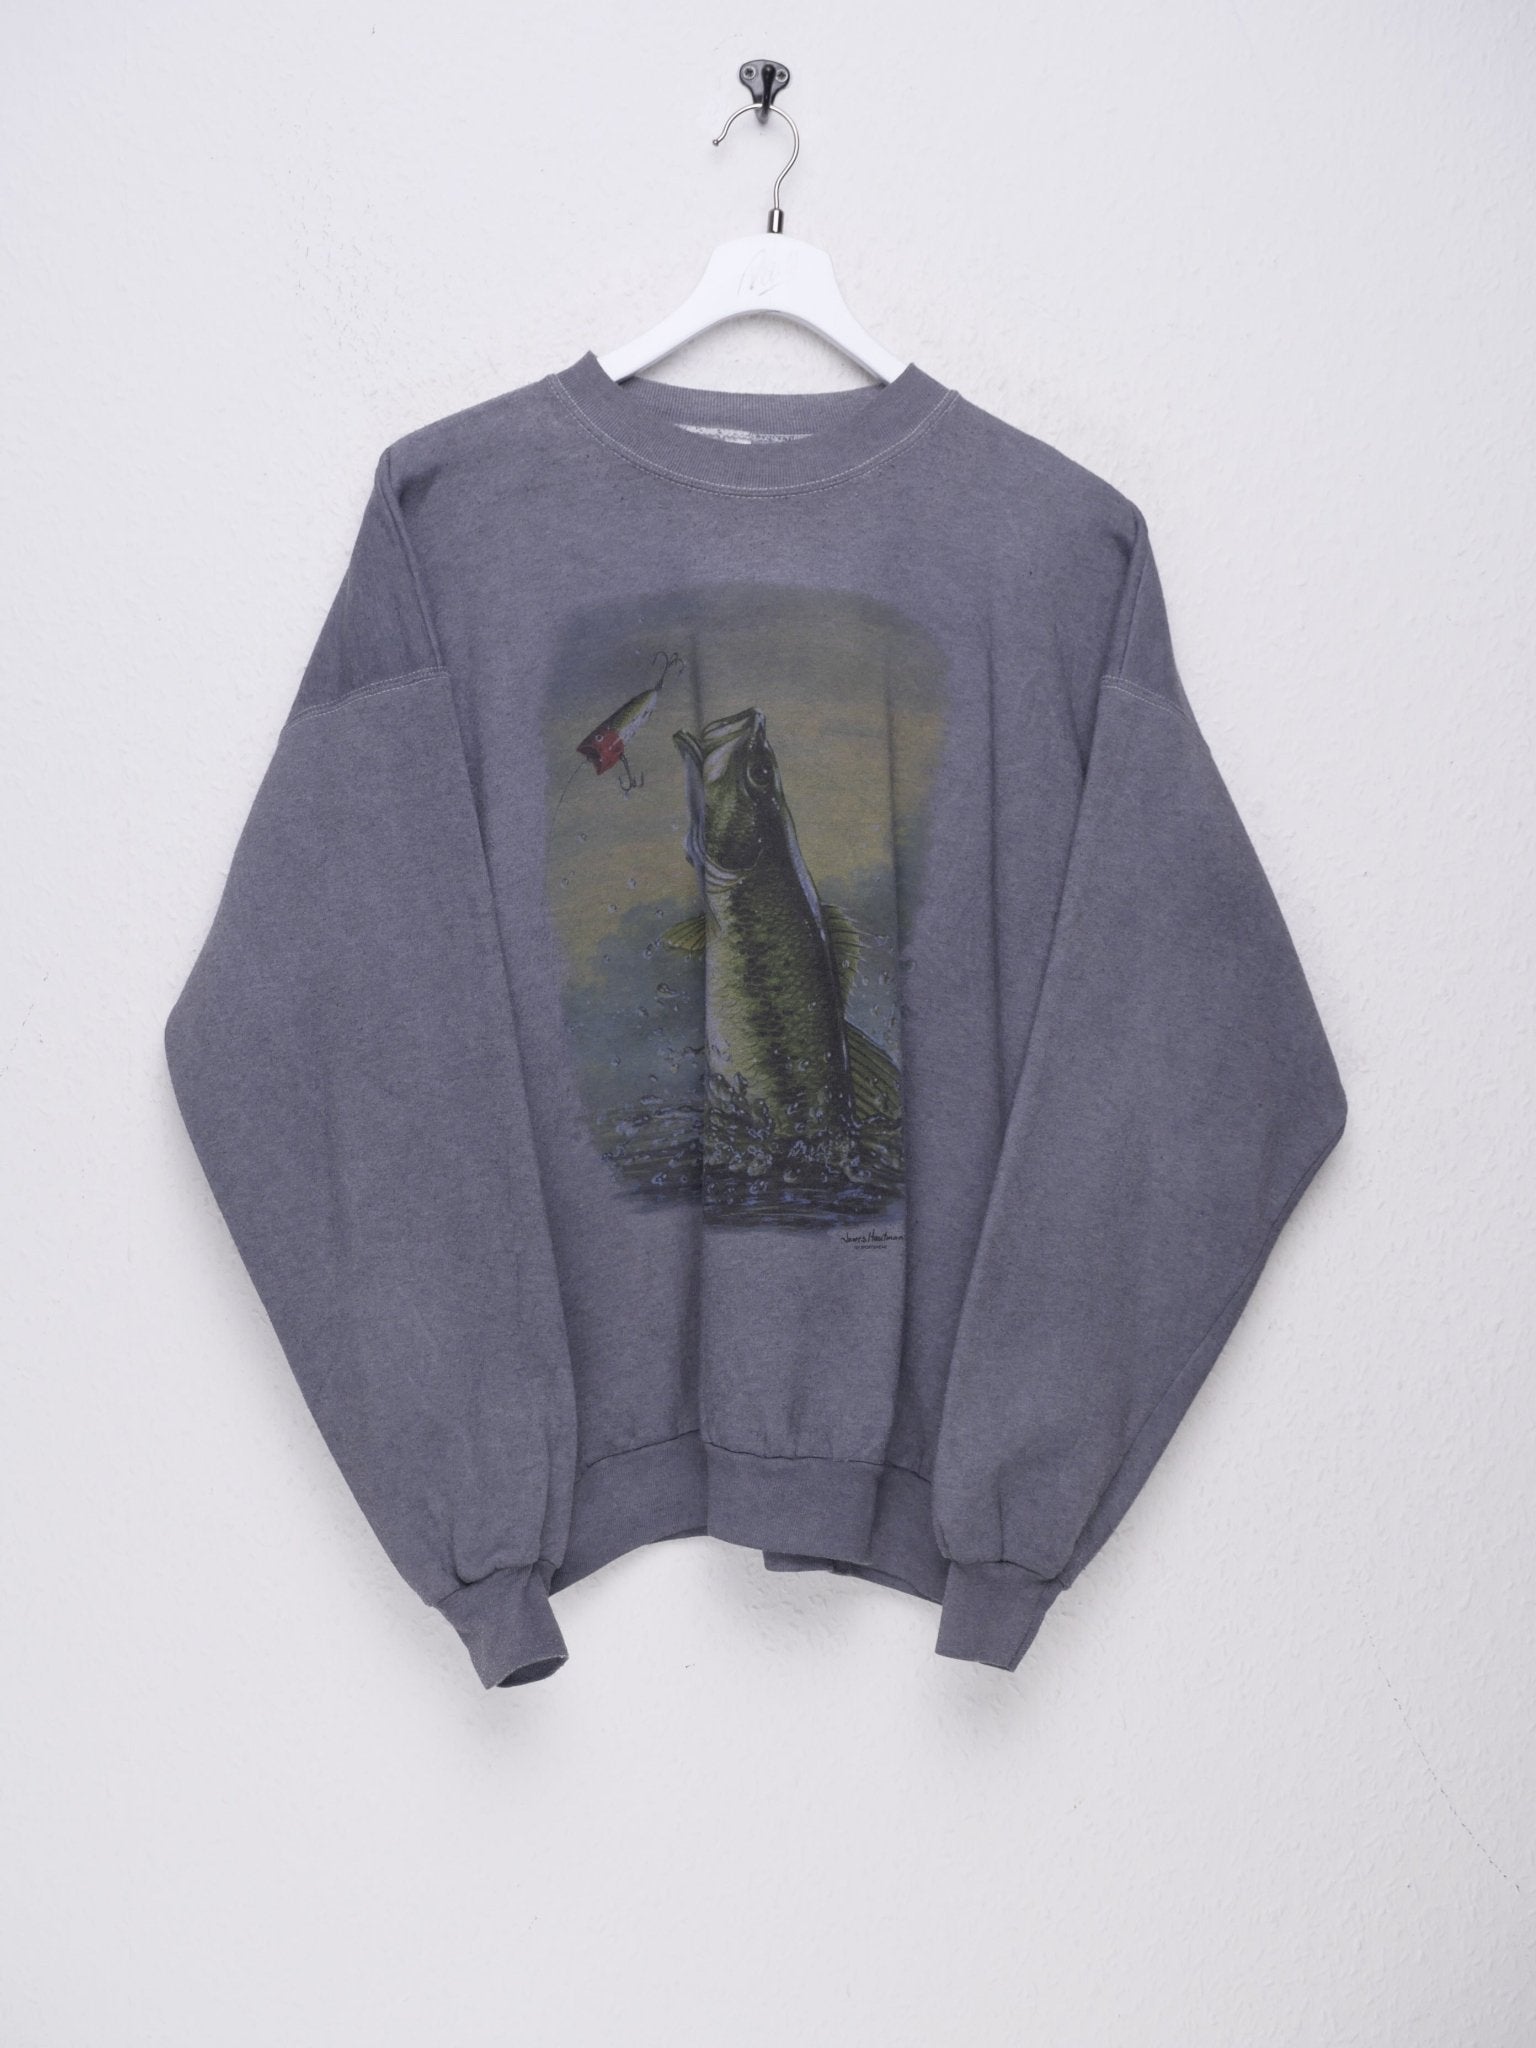 Fishing printed Graphic grey Sweater - Peeces